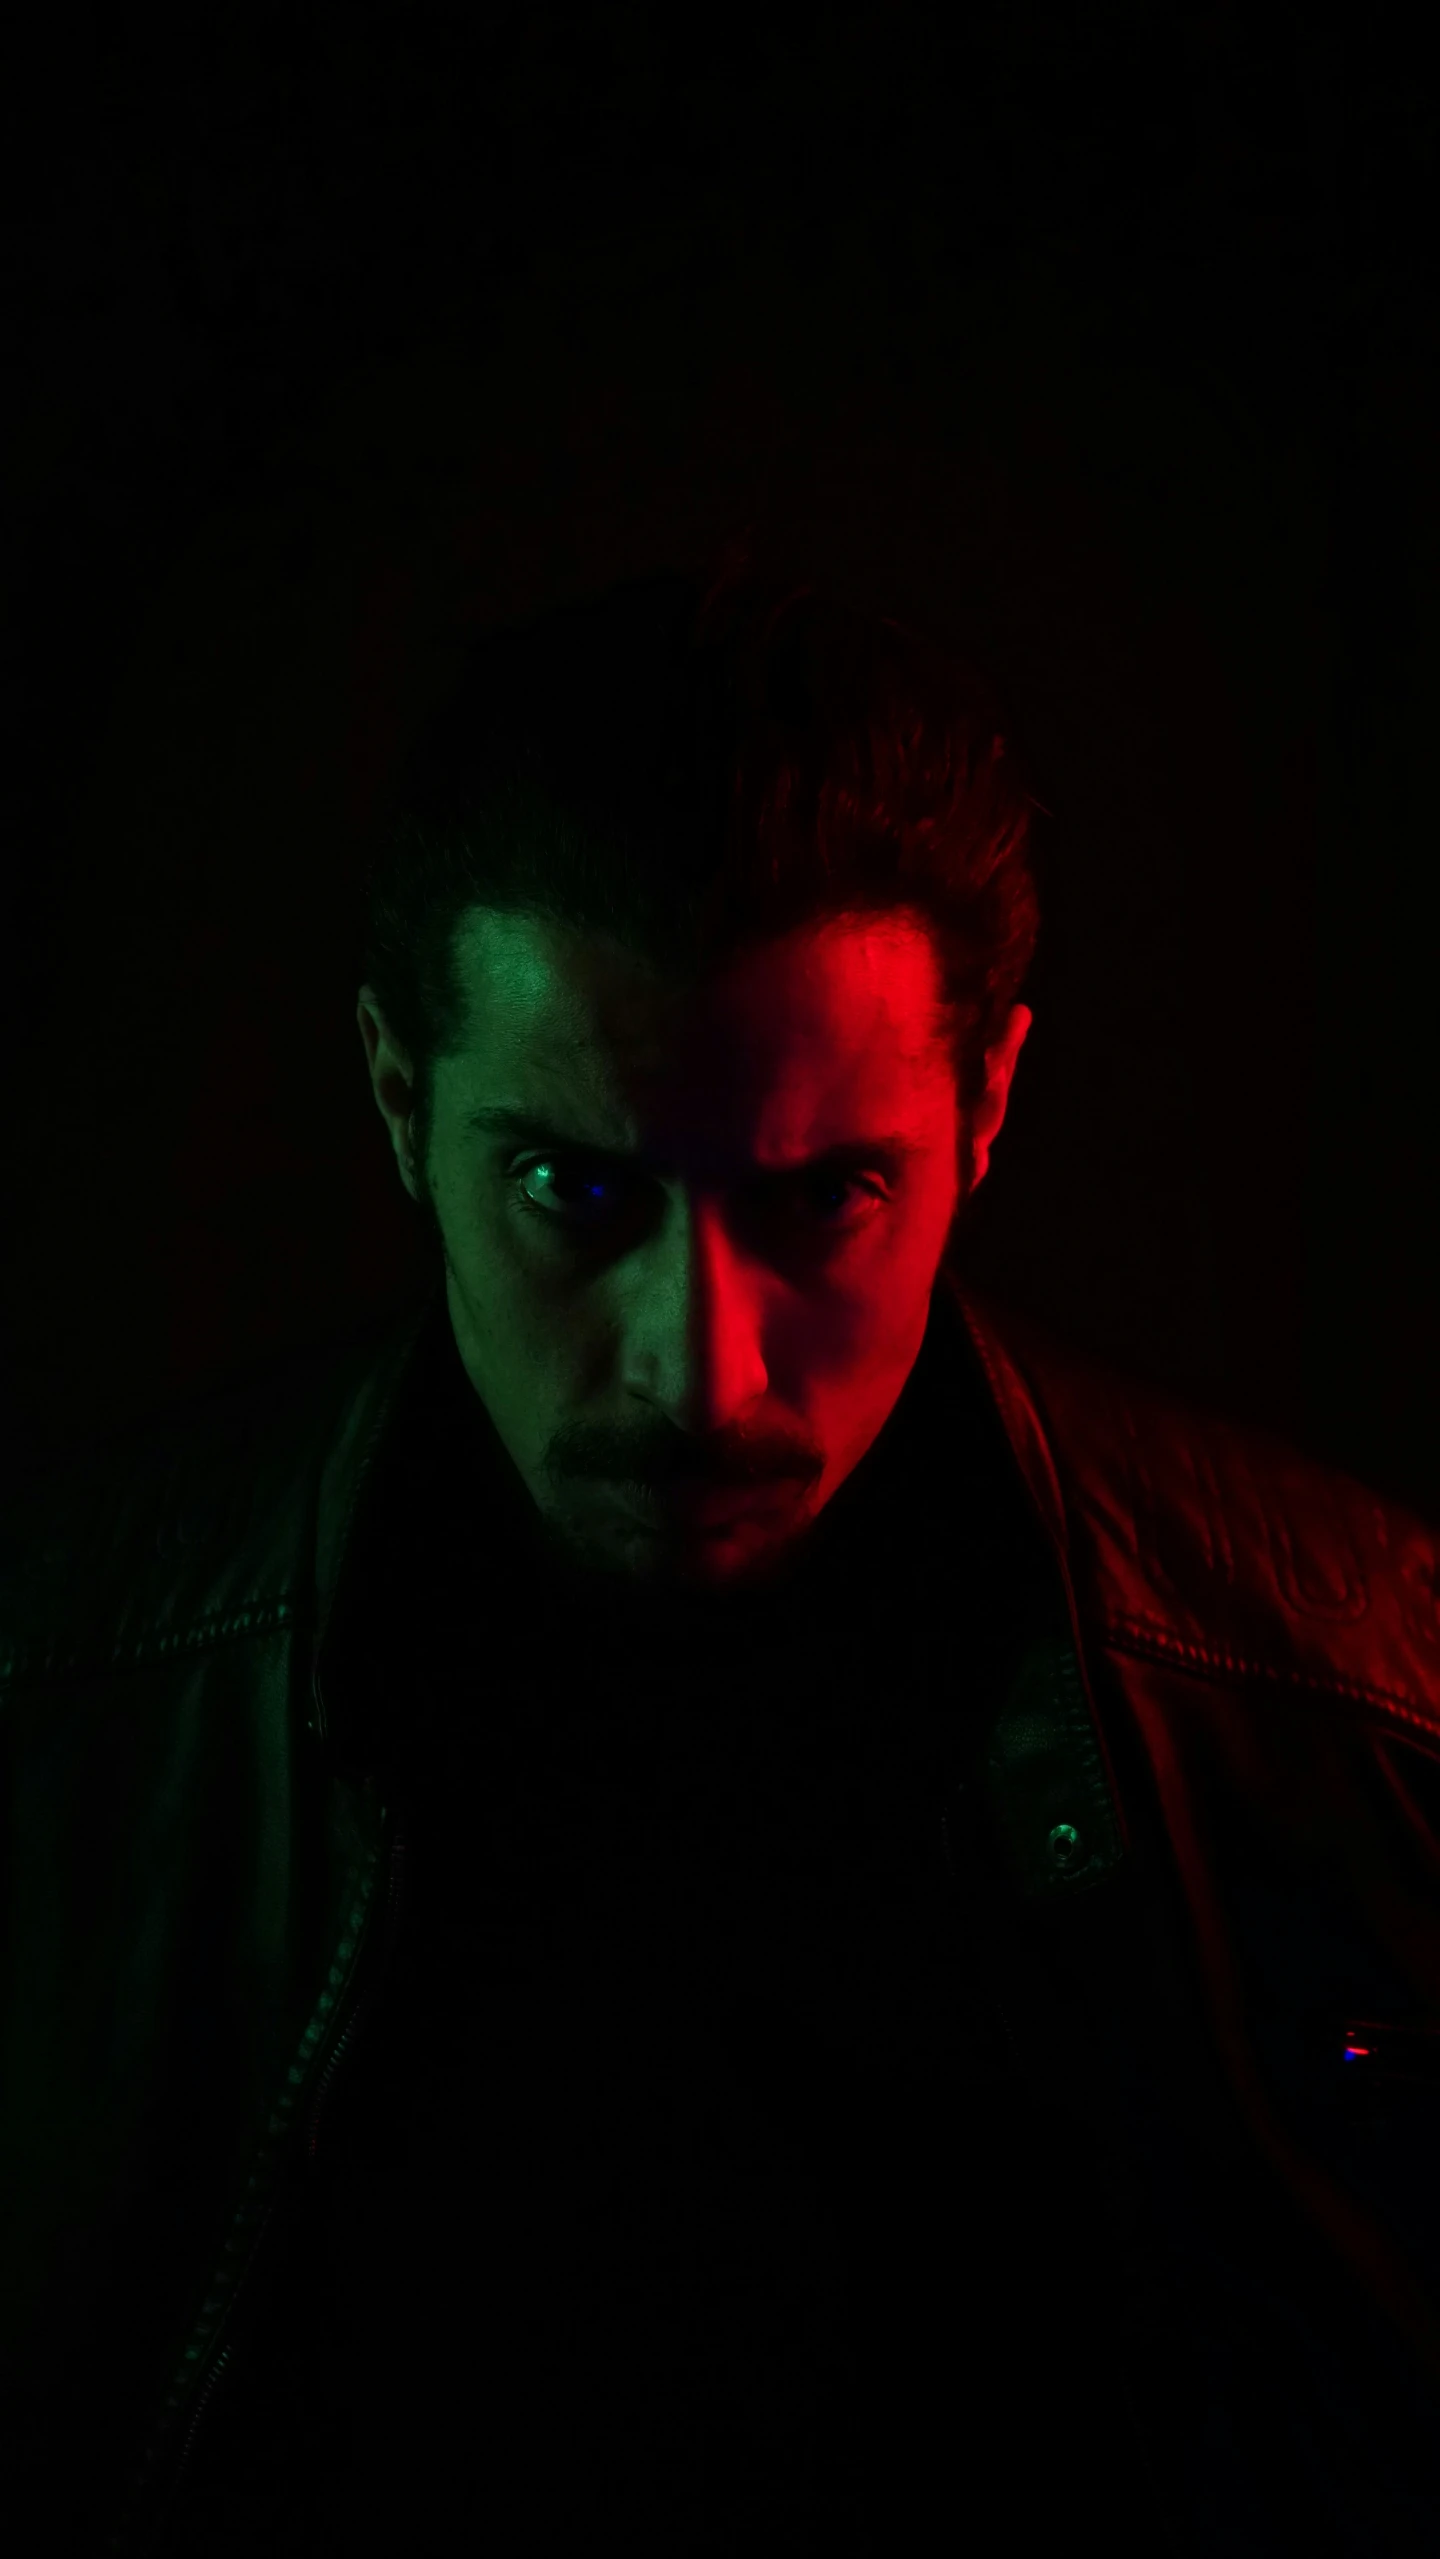 a man standing in a dark room with his head slightly turned towards the camera